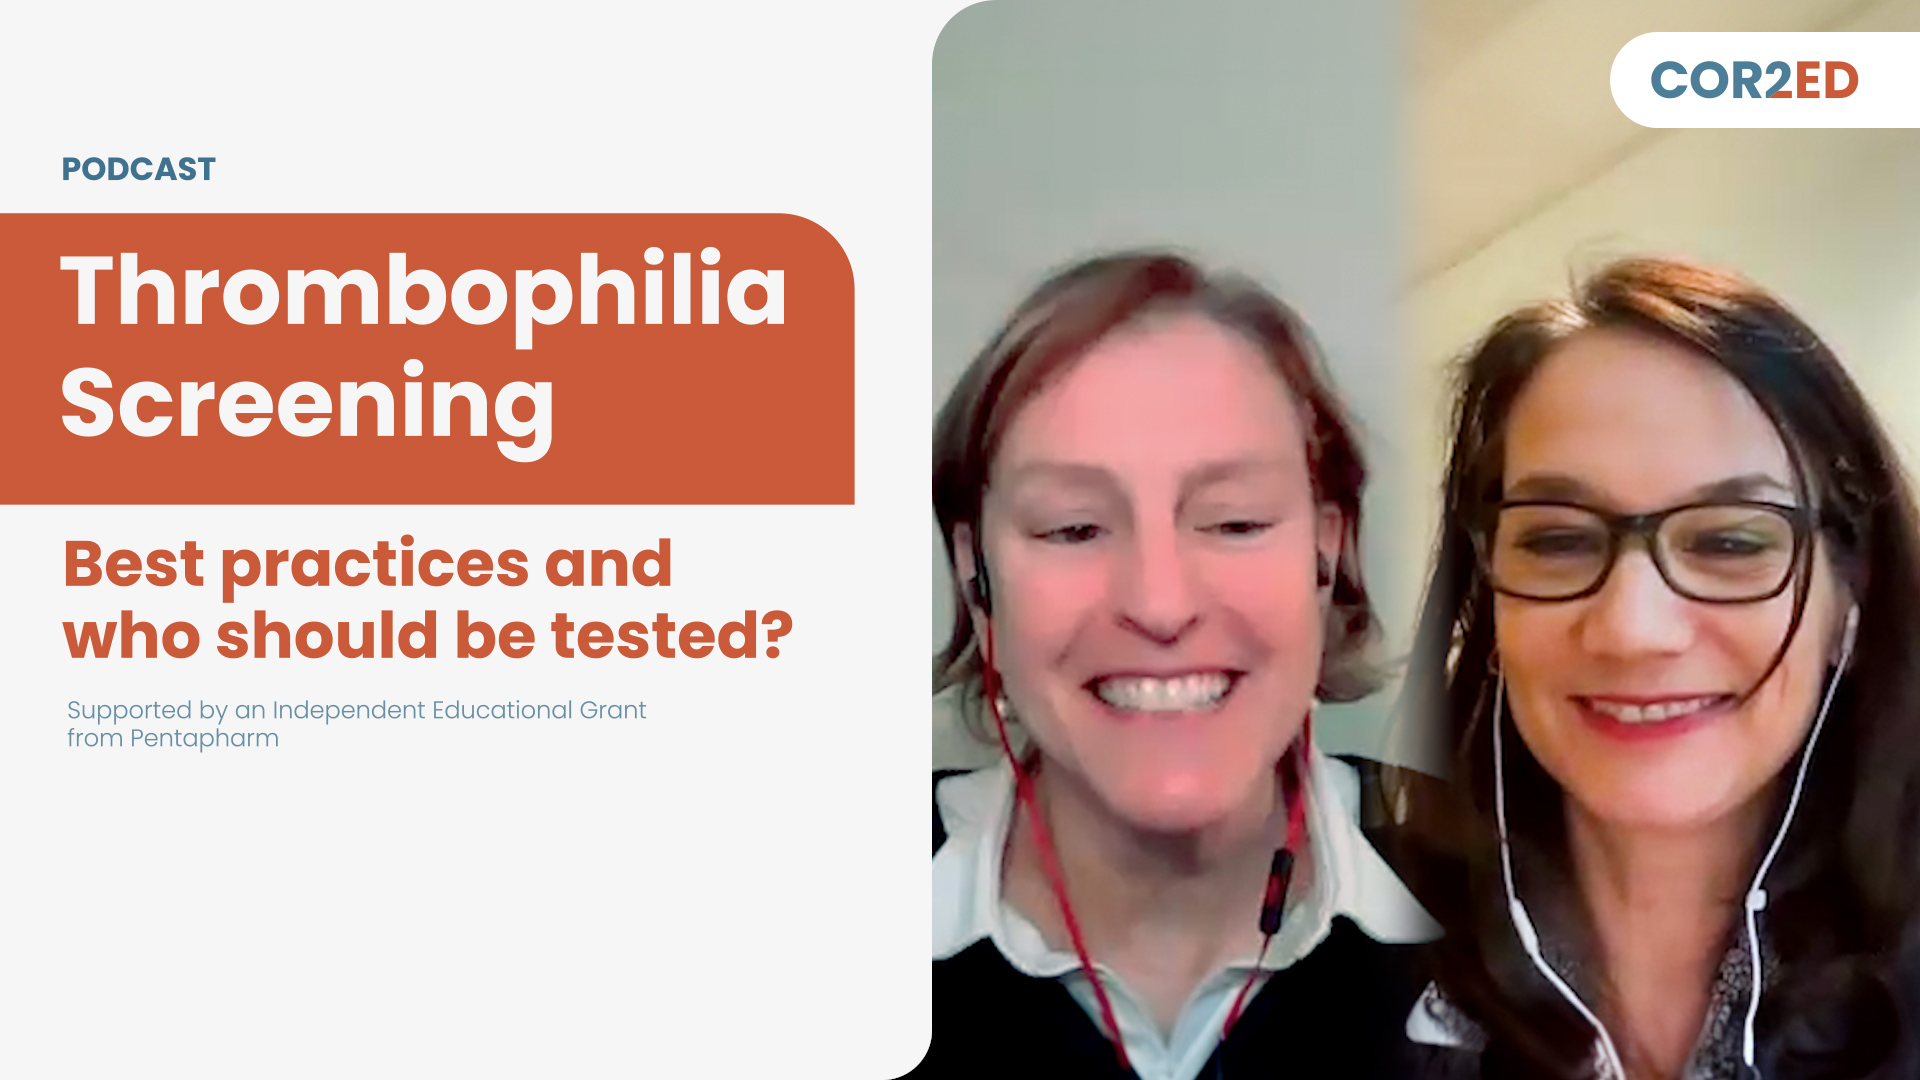 Thrombophilia testing: Who to test and when?